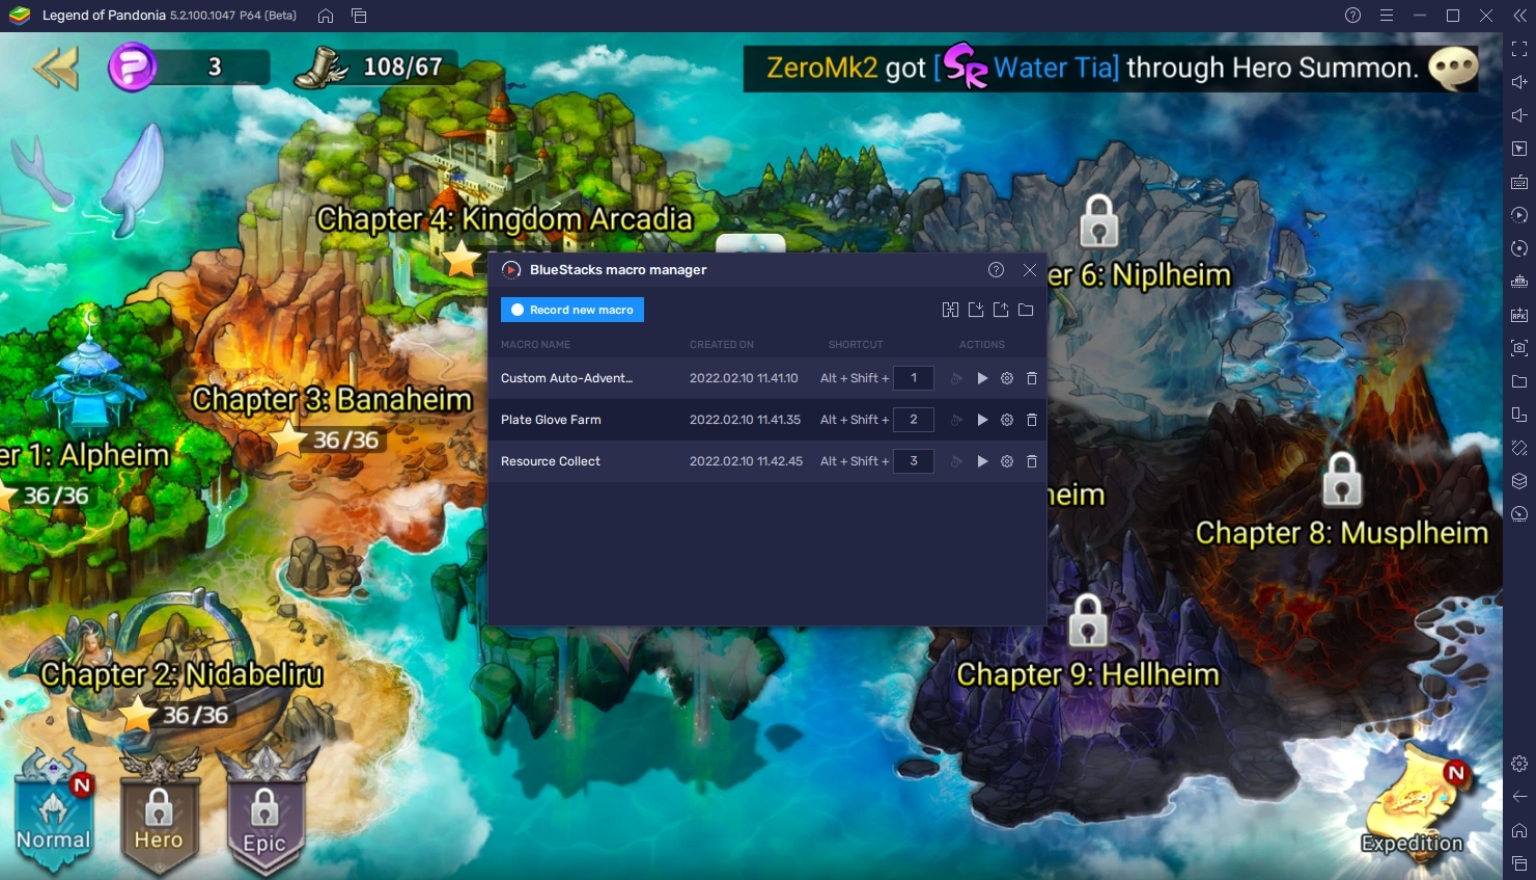 How to Play Legend of Pandonia on PC with BlueStacks